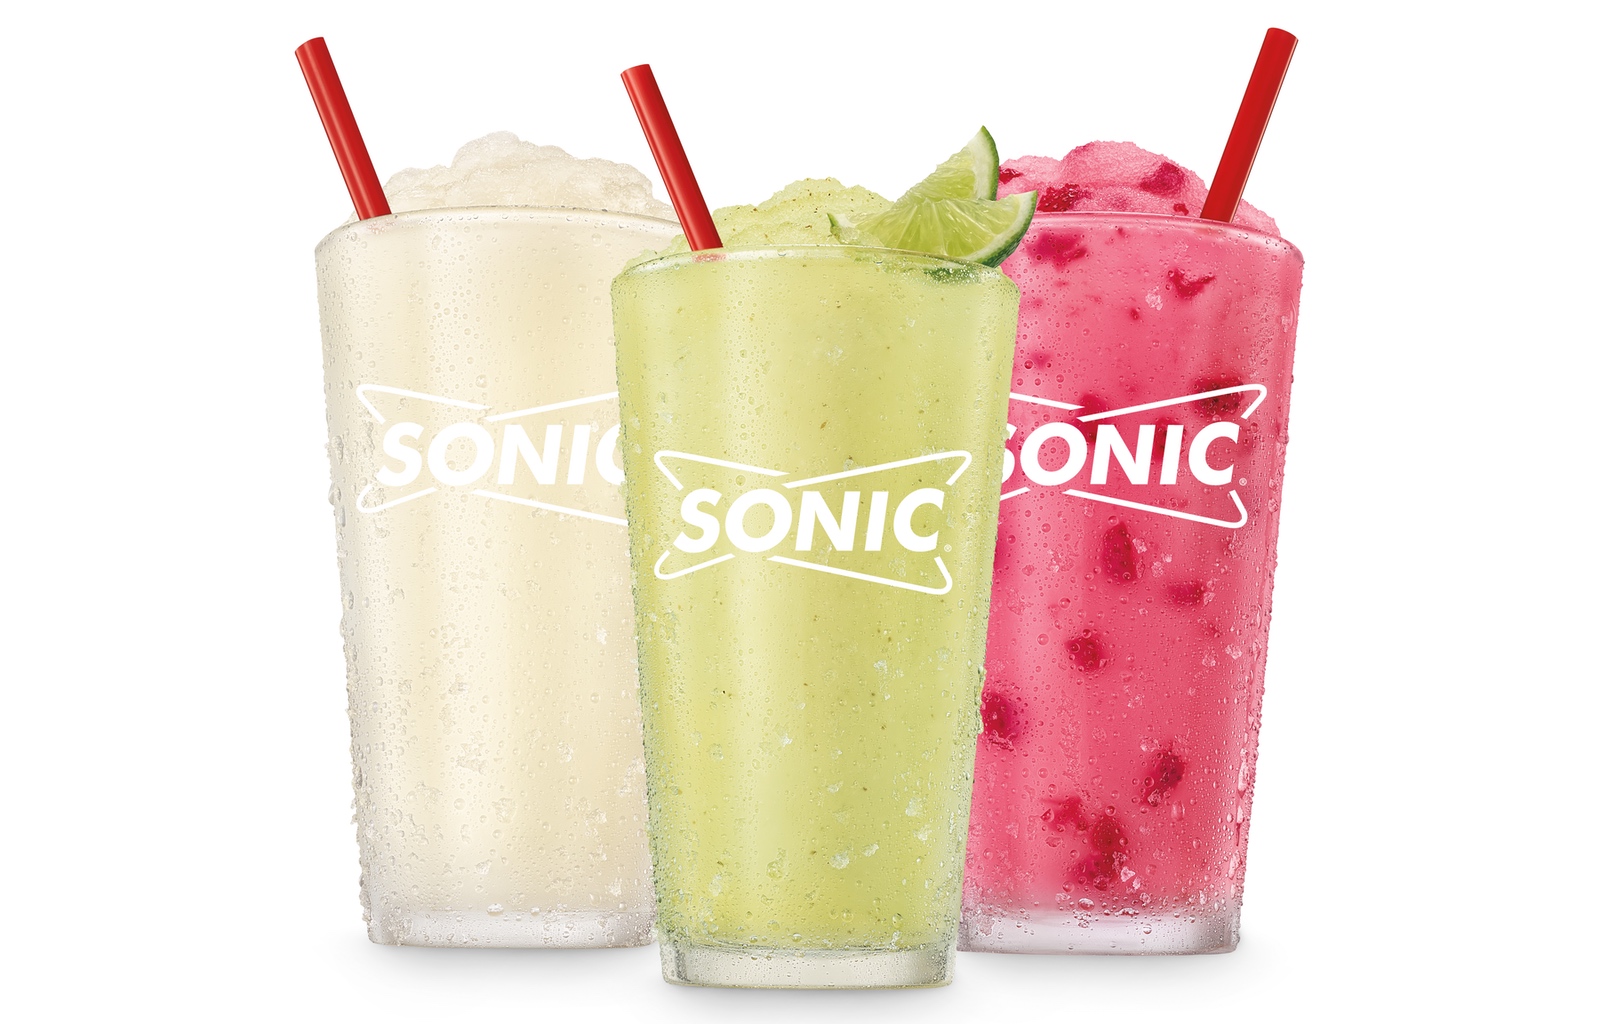 SONIC DriveIn Brings the Fire with New Lineup of Mocktail Slushes